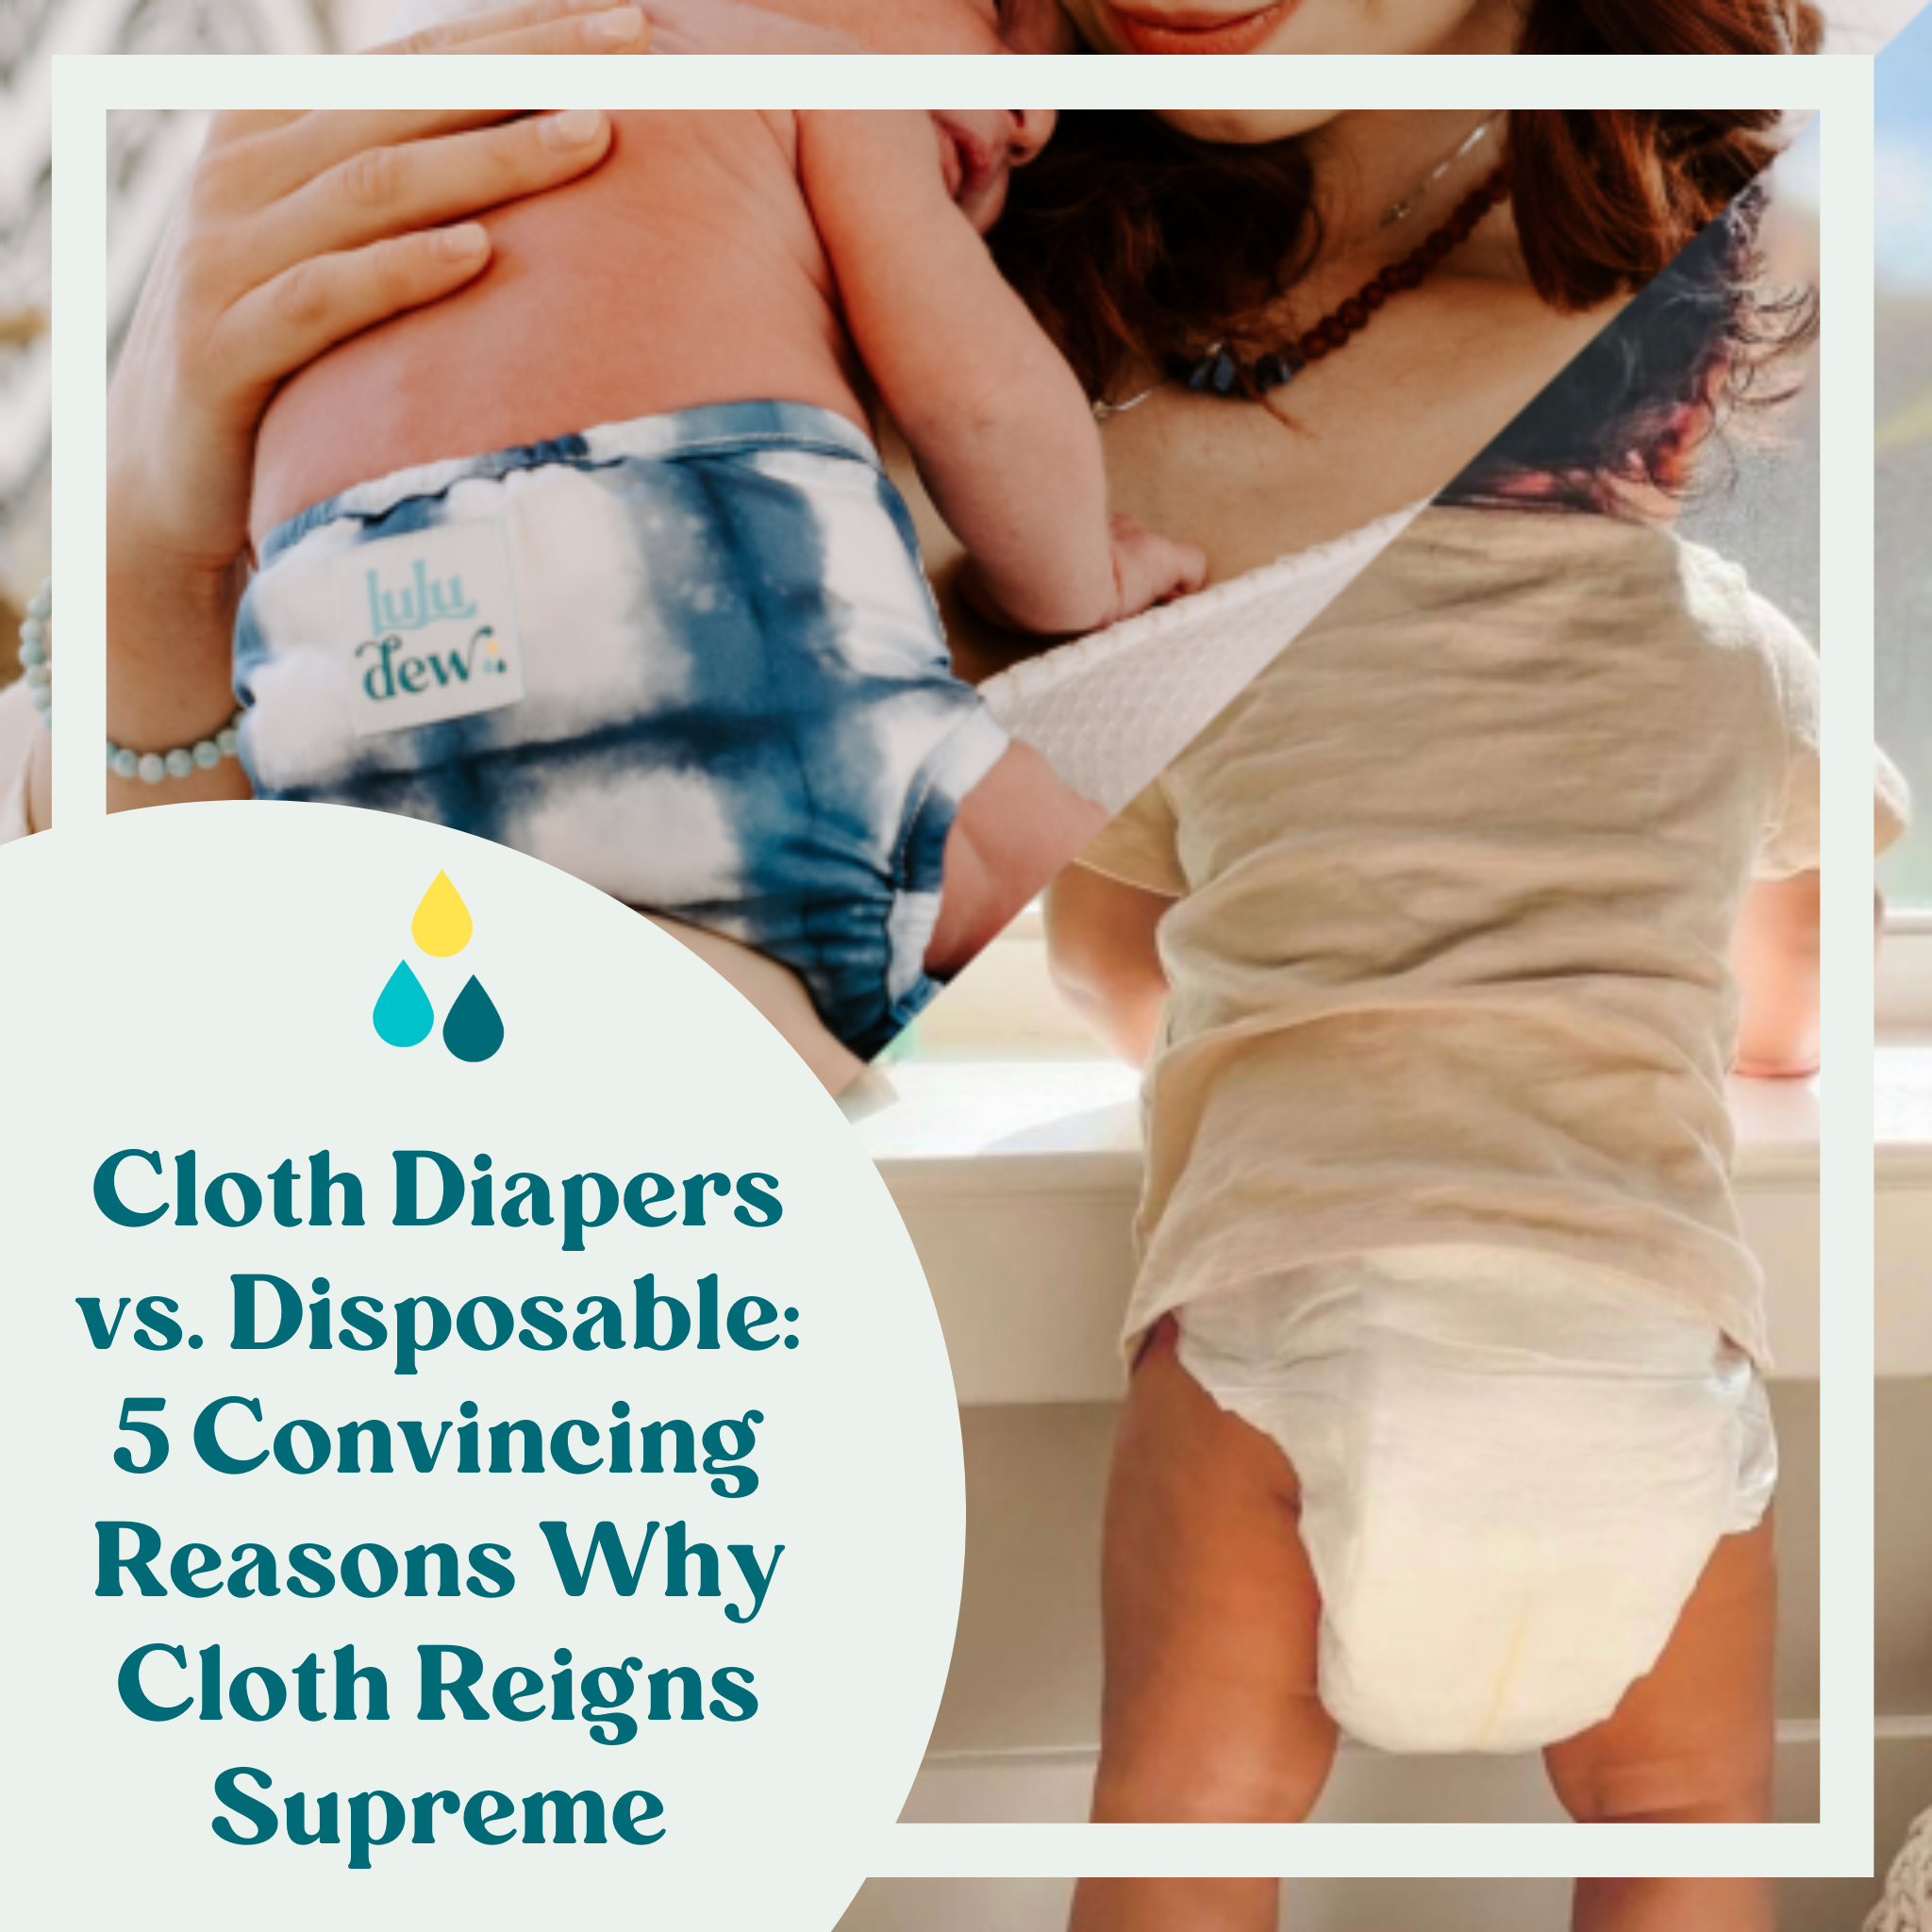 Cloth Diapers vs. Disposable: 5 Convincing Reasons Why Cloth Reigns Supreme